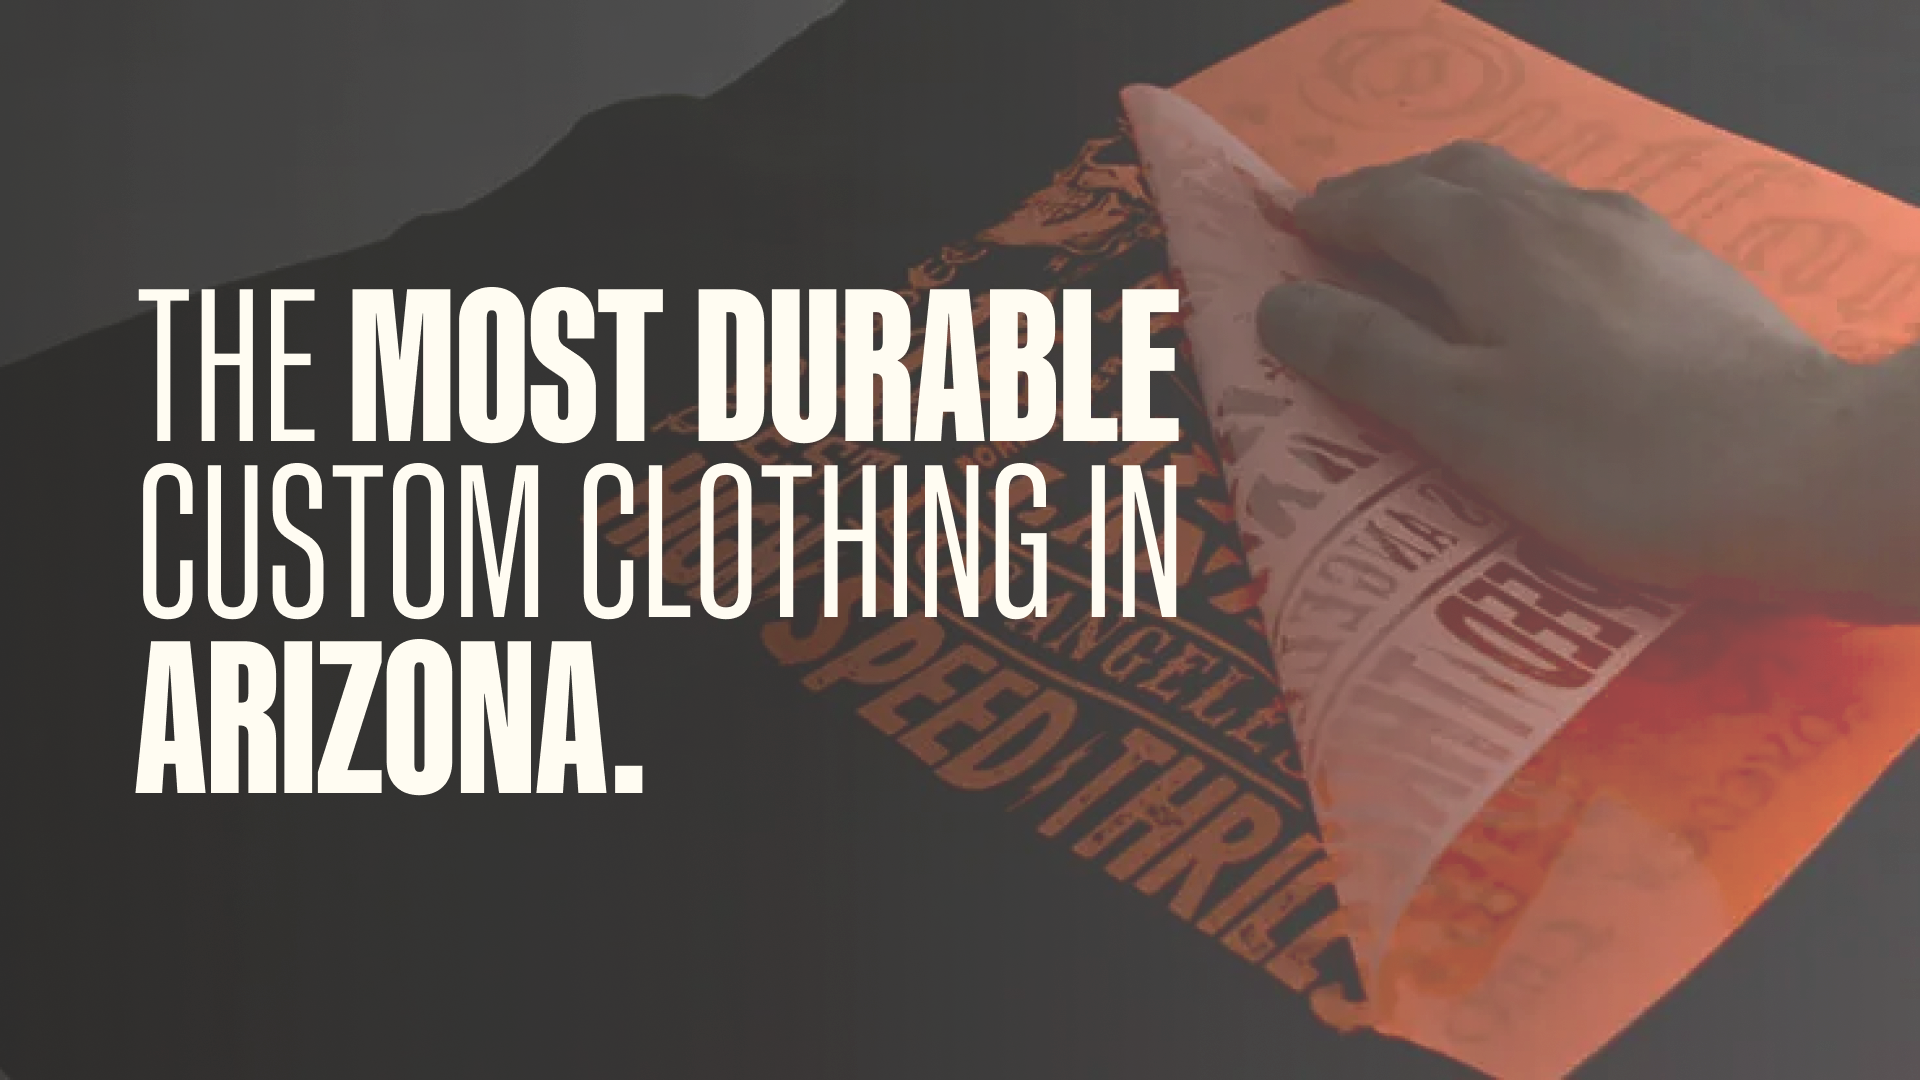 The most durable custom clothing in Arizona.